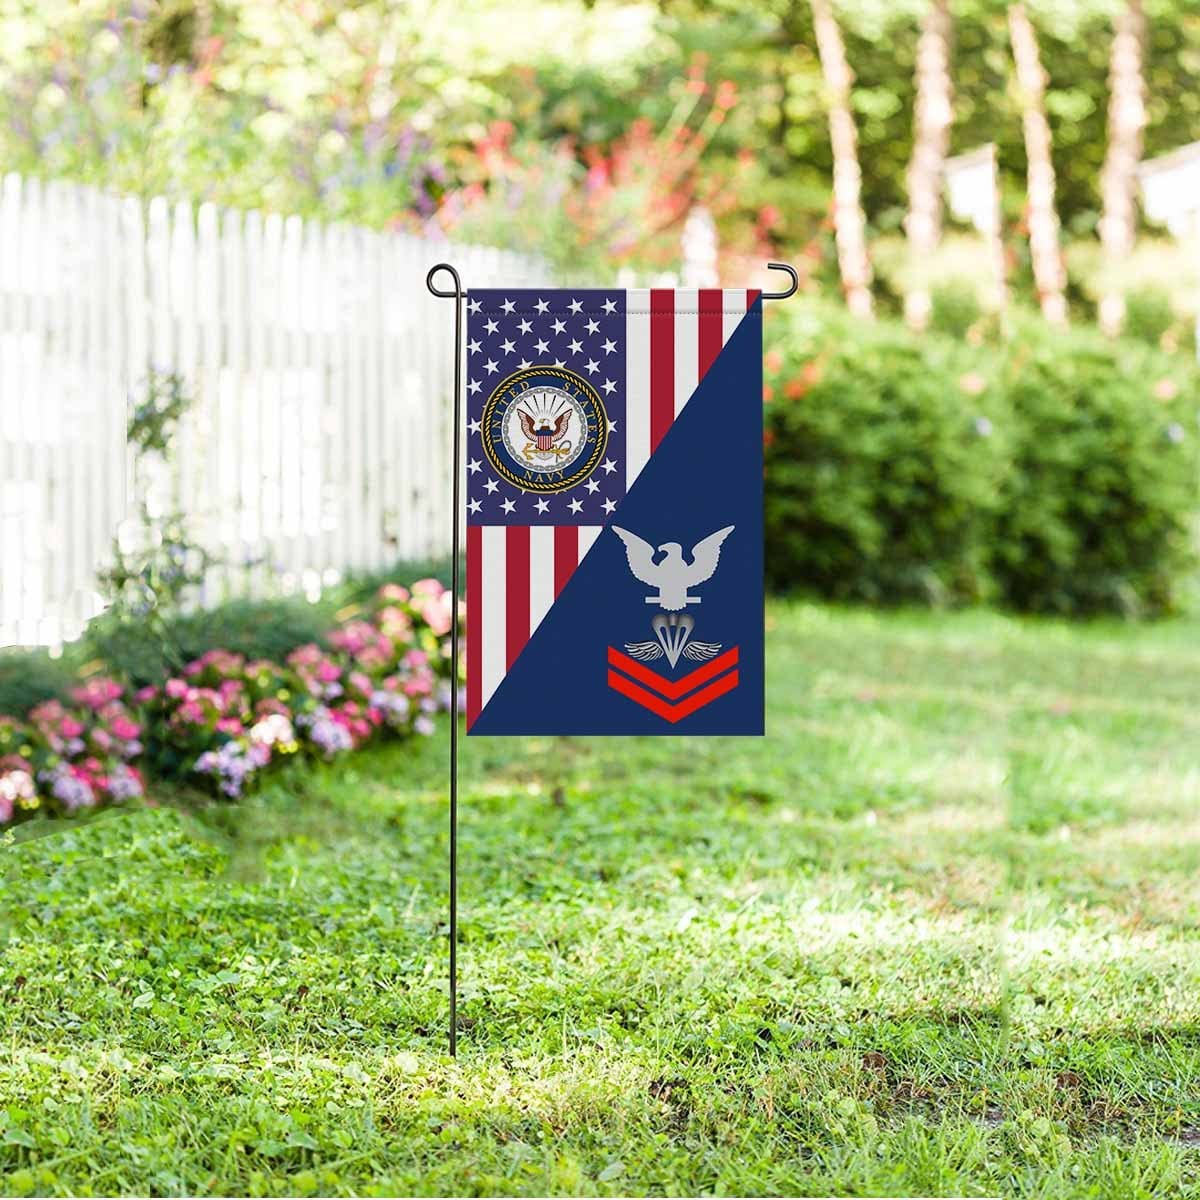 Navy Aircrew Survival Equipmentman Navy PR E-5 Red Stripe Garden Flag/Yard Flag 12 inches x 18 inches Twin-Side Printing-GDFlag-Navy-Rating-Veterans Nation